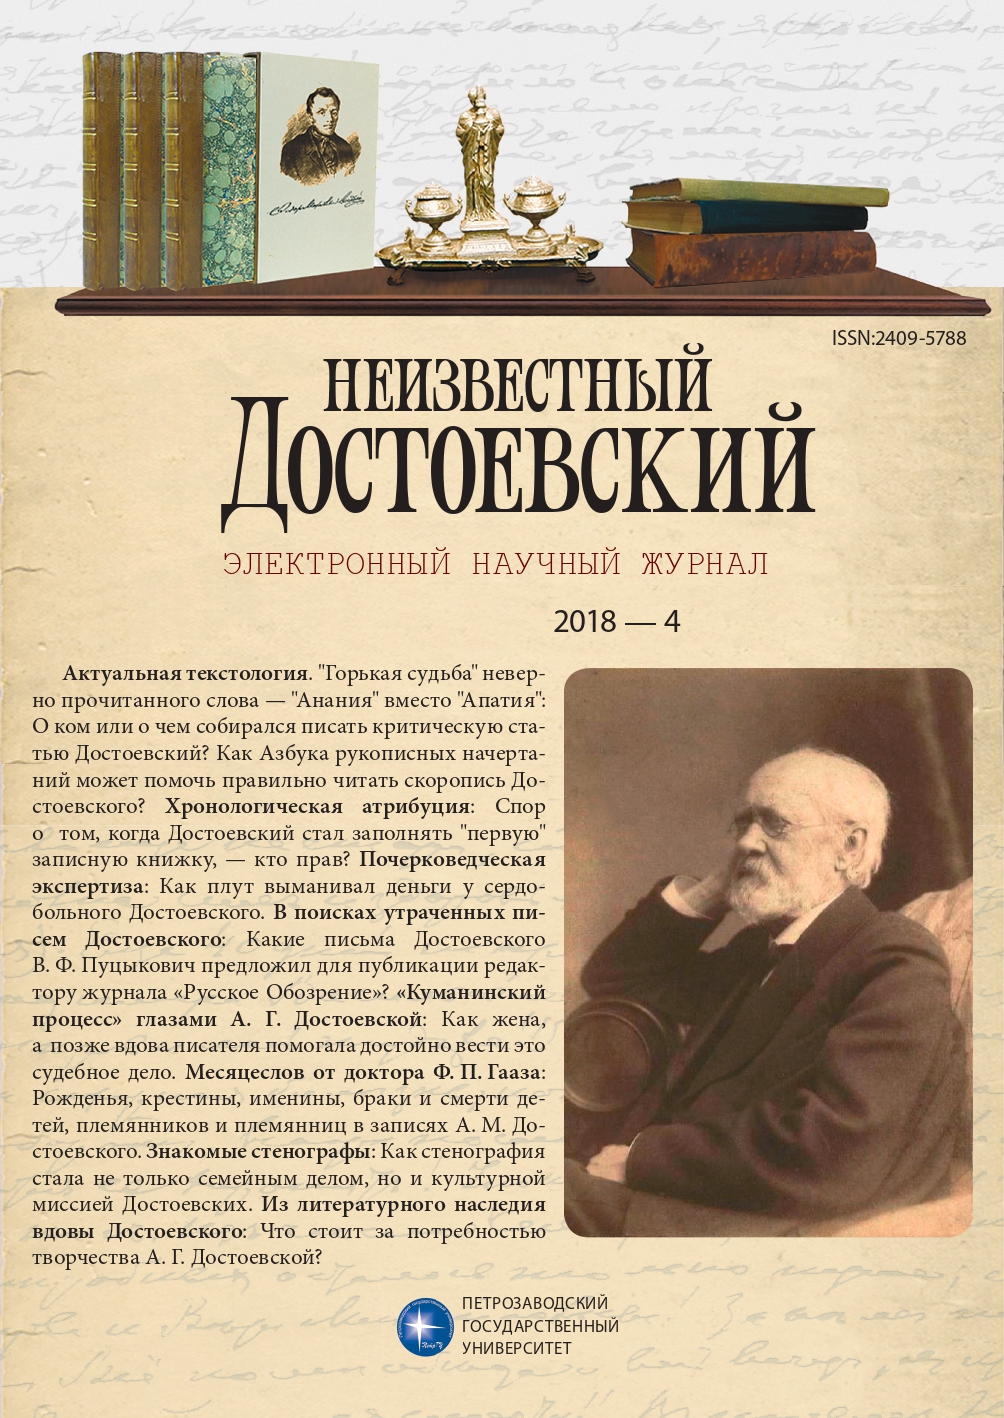 P. M. Olkhin and Yu.-W. Zeibig: Professors of Shorthand and Acquaintances of Dostoevsky’s Family Cover Image